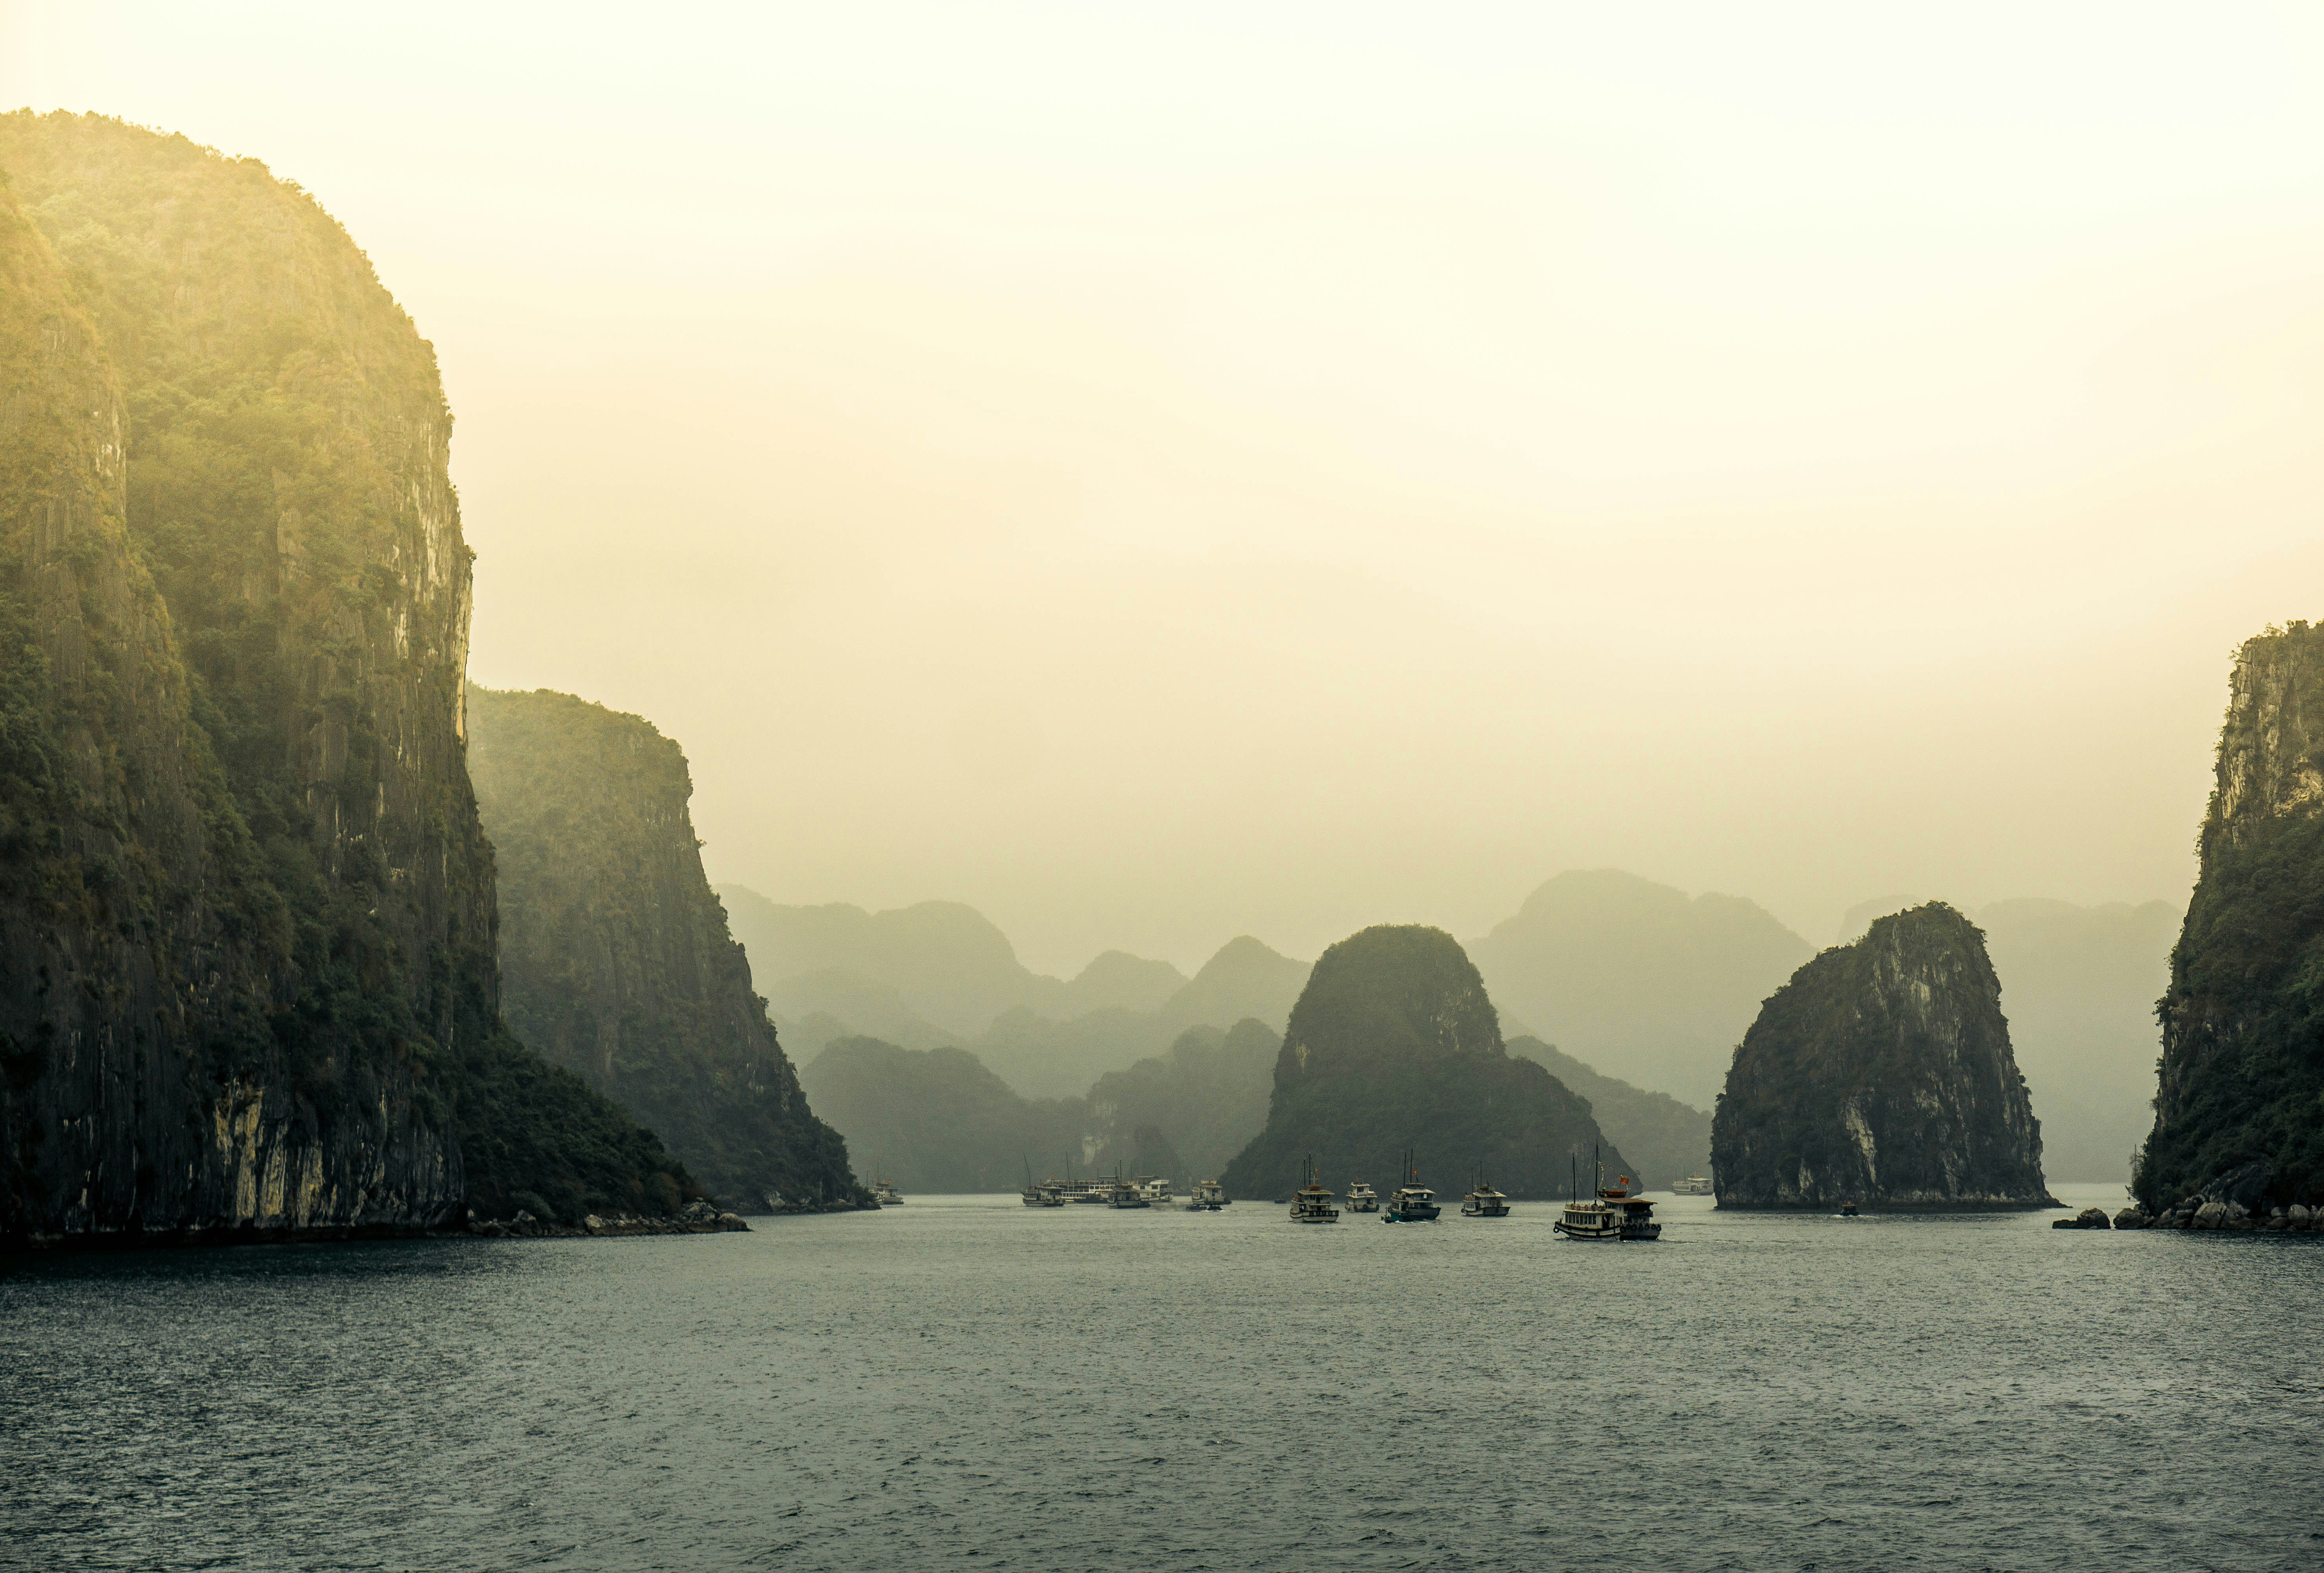 We travel forwards on a foggy day into the shrouded mystery that is Ha Long Bay.